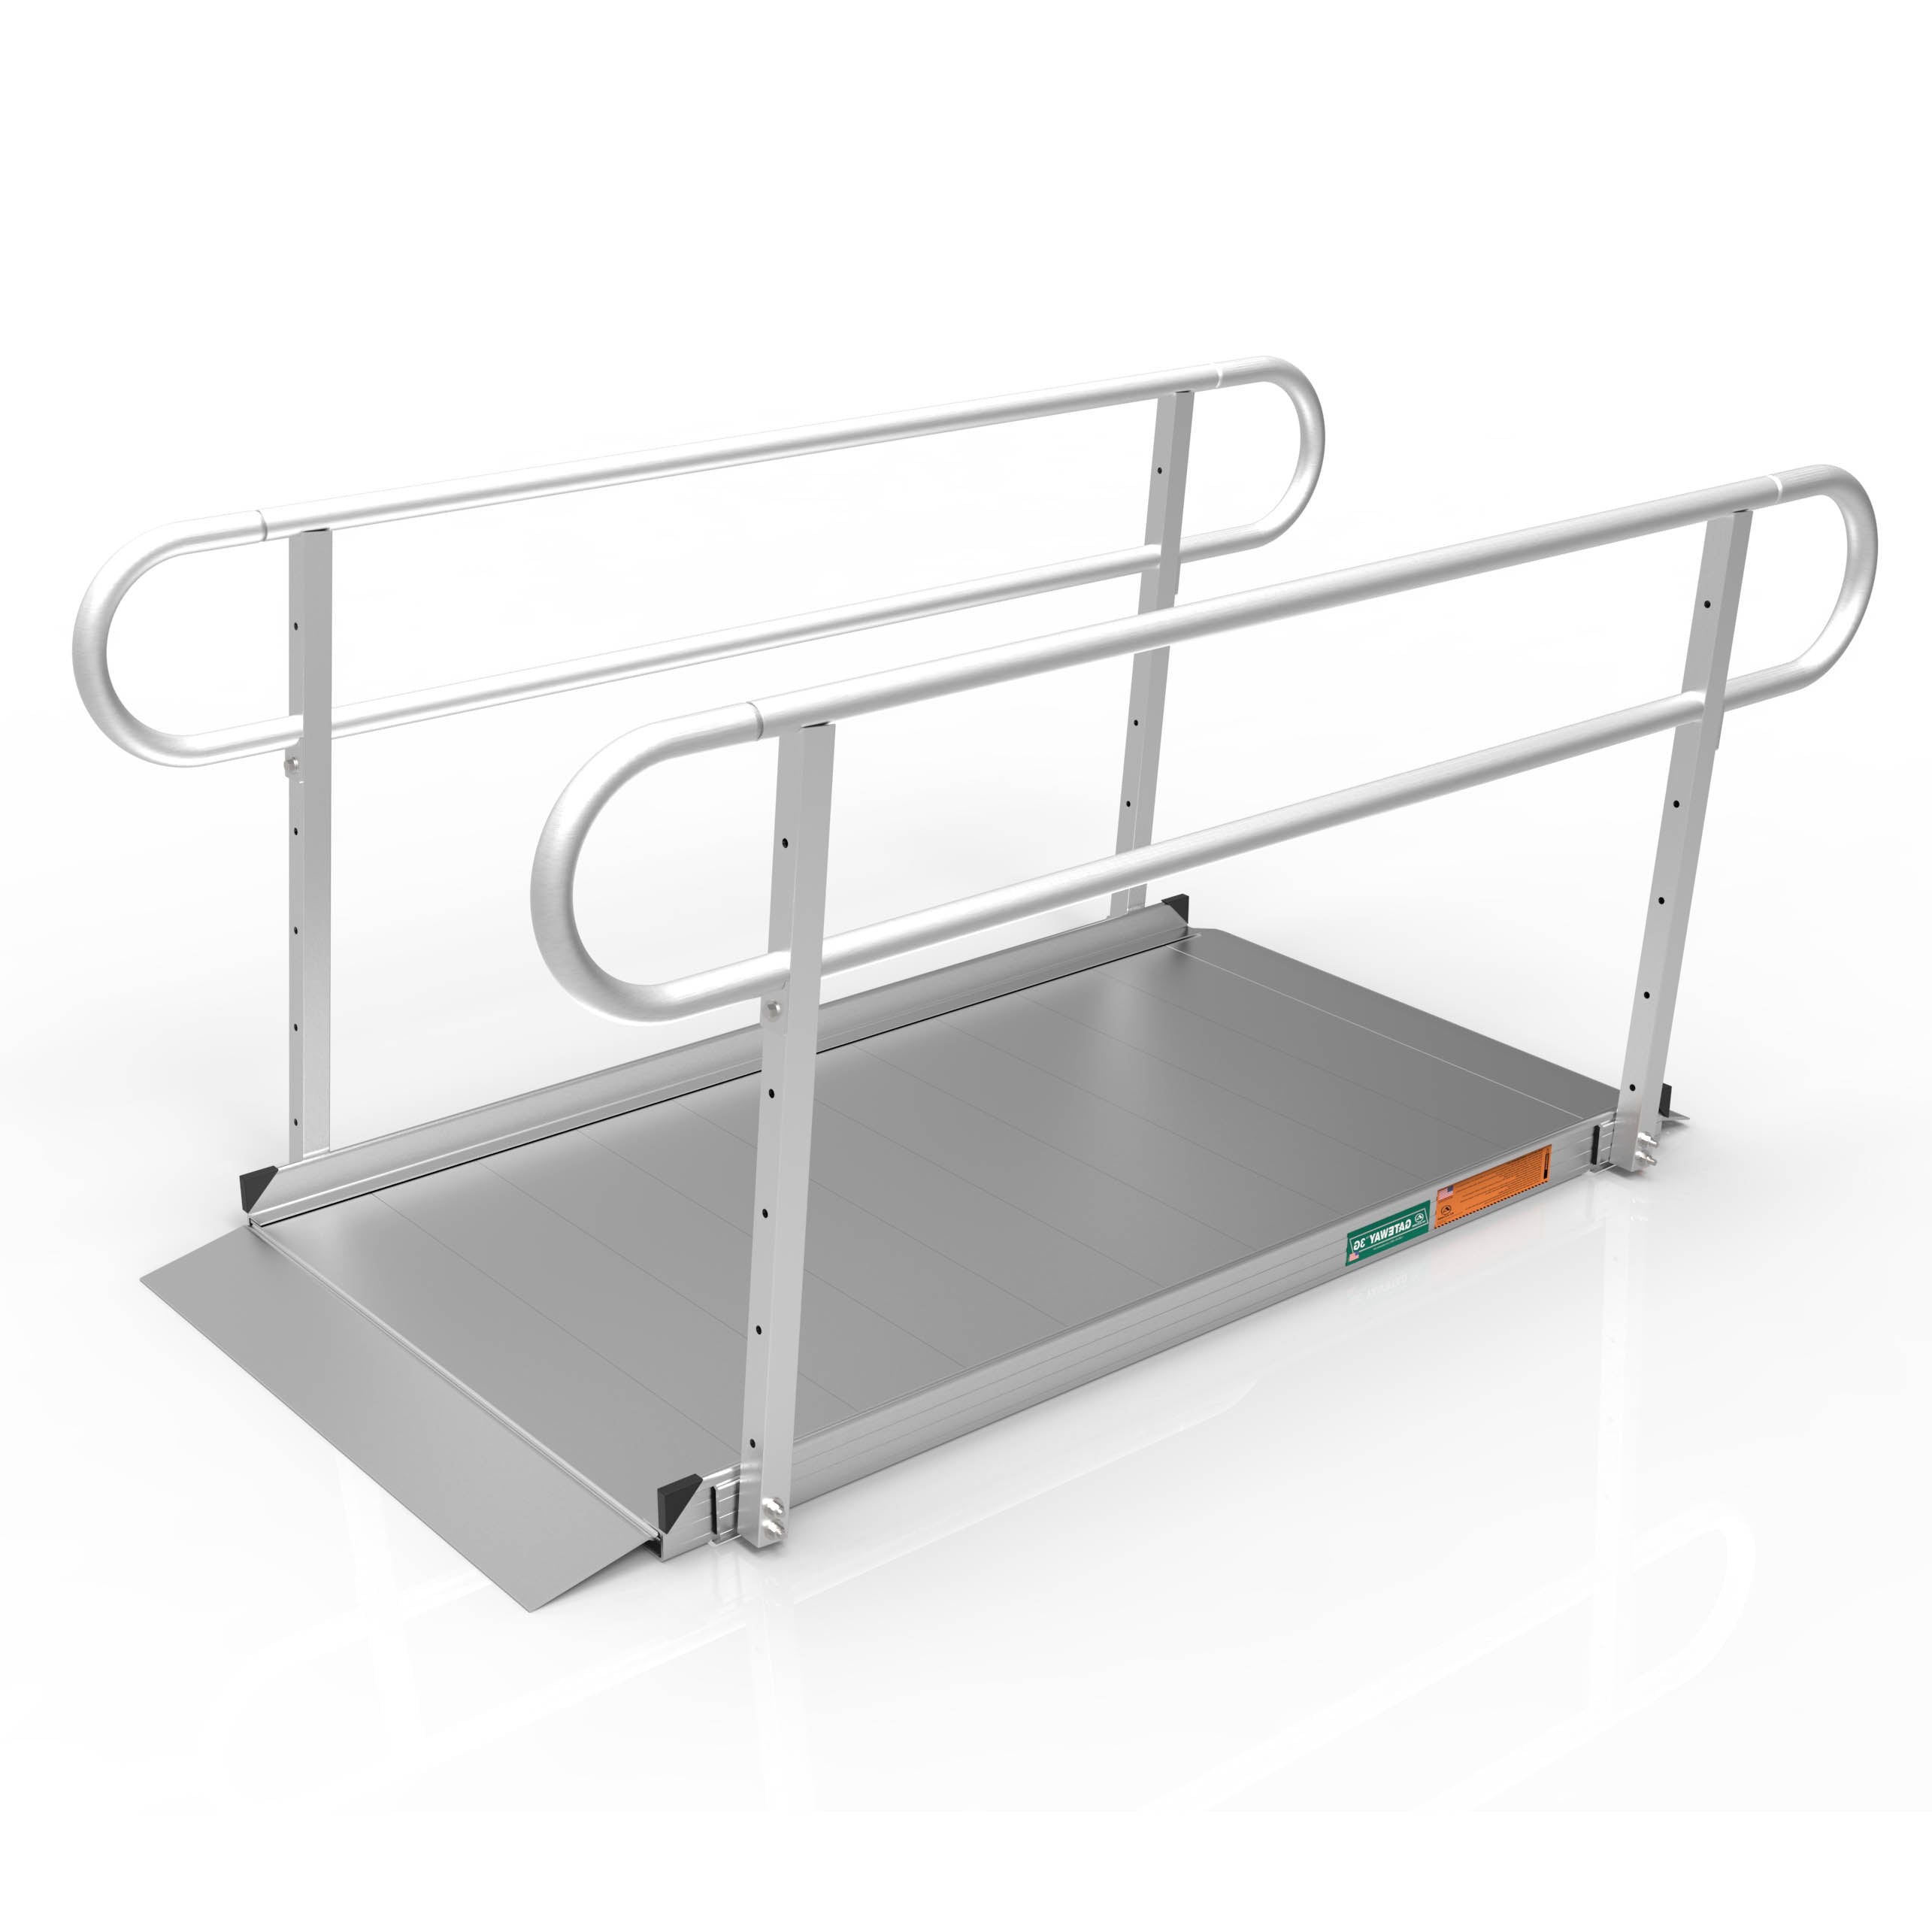 EZ-ACCESS® GATEWAY™ 3G Solid Surface Portable Ramp (Two-Line Handrails) 6 Foot